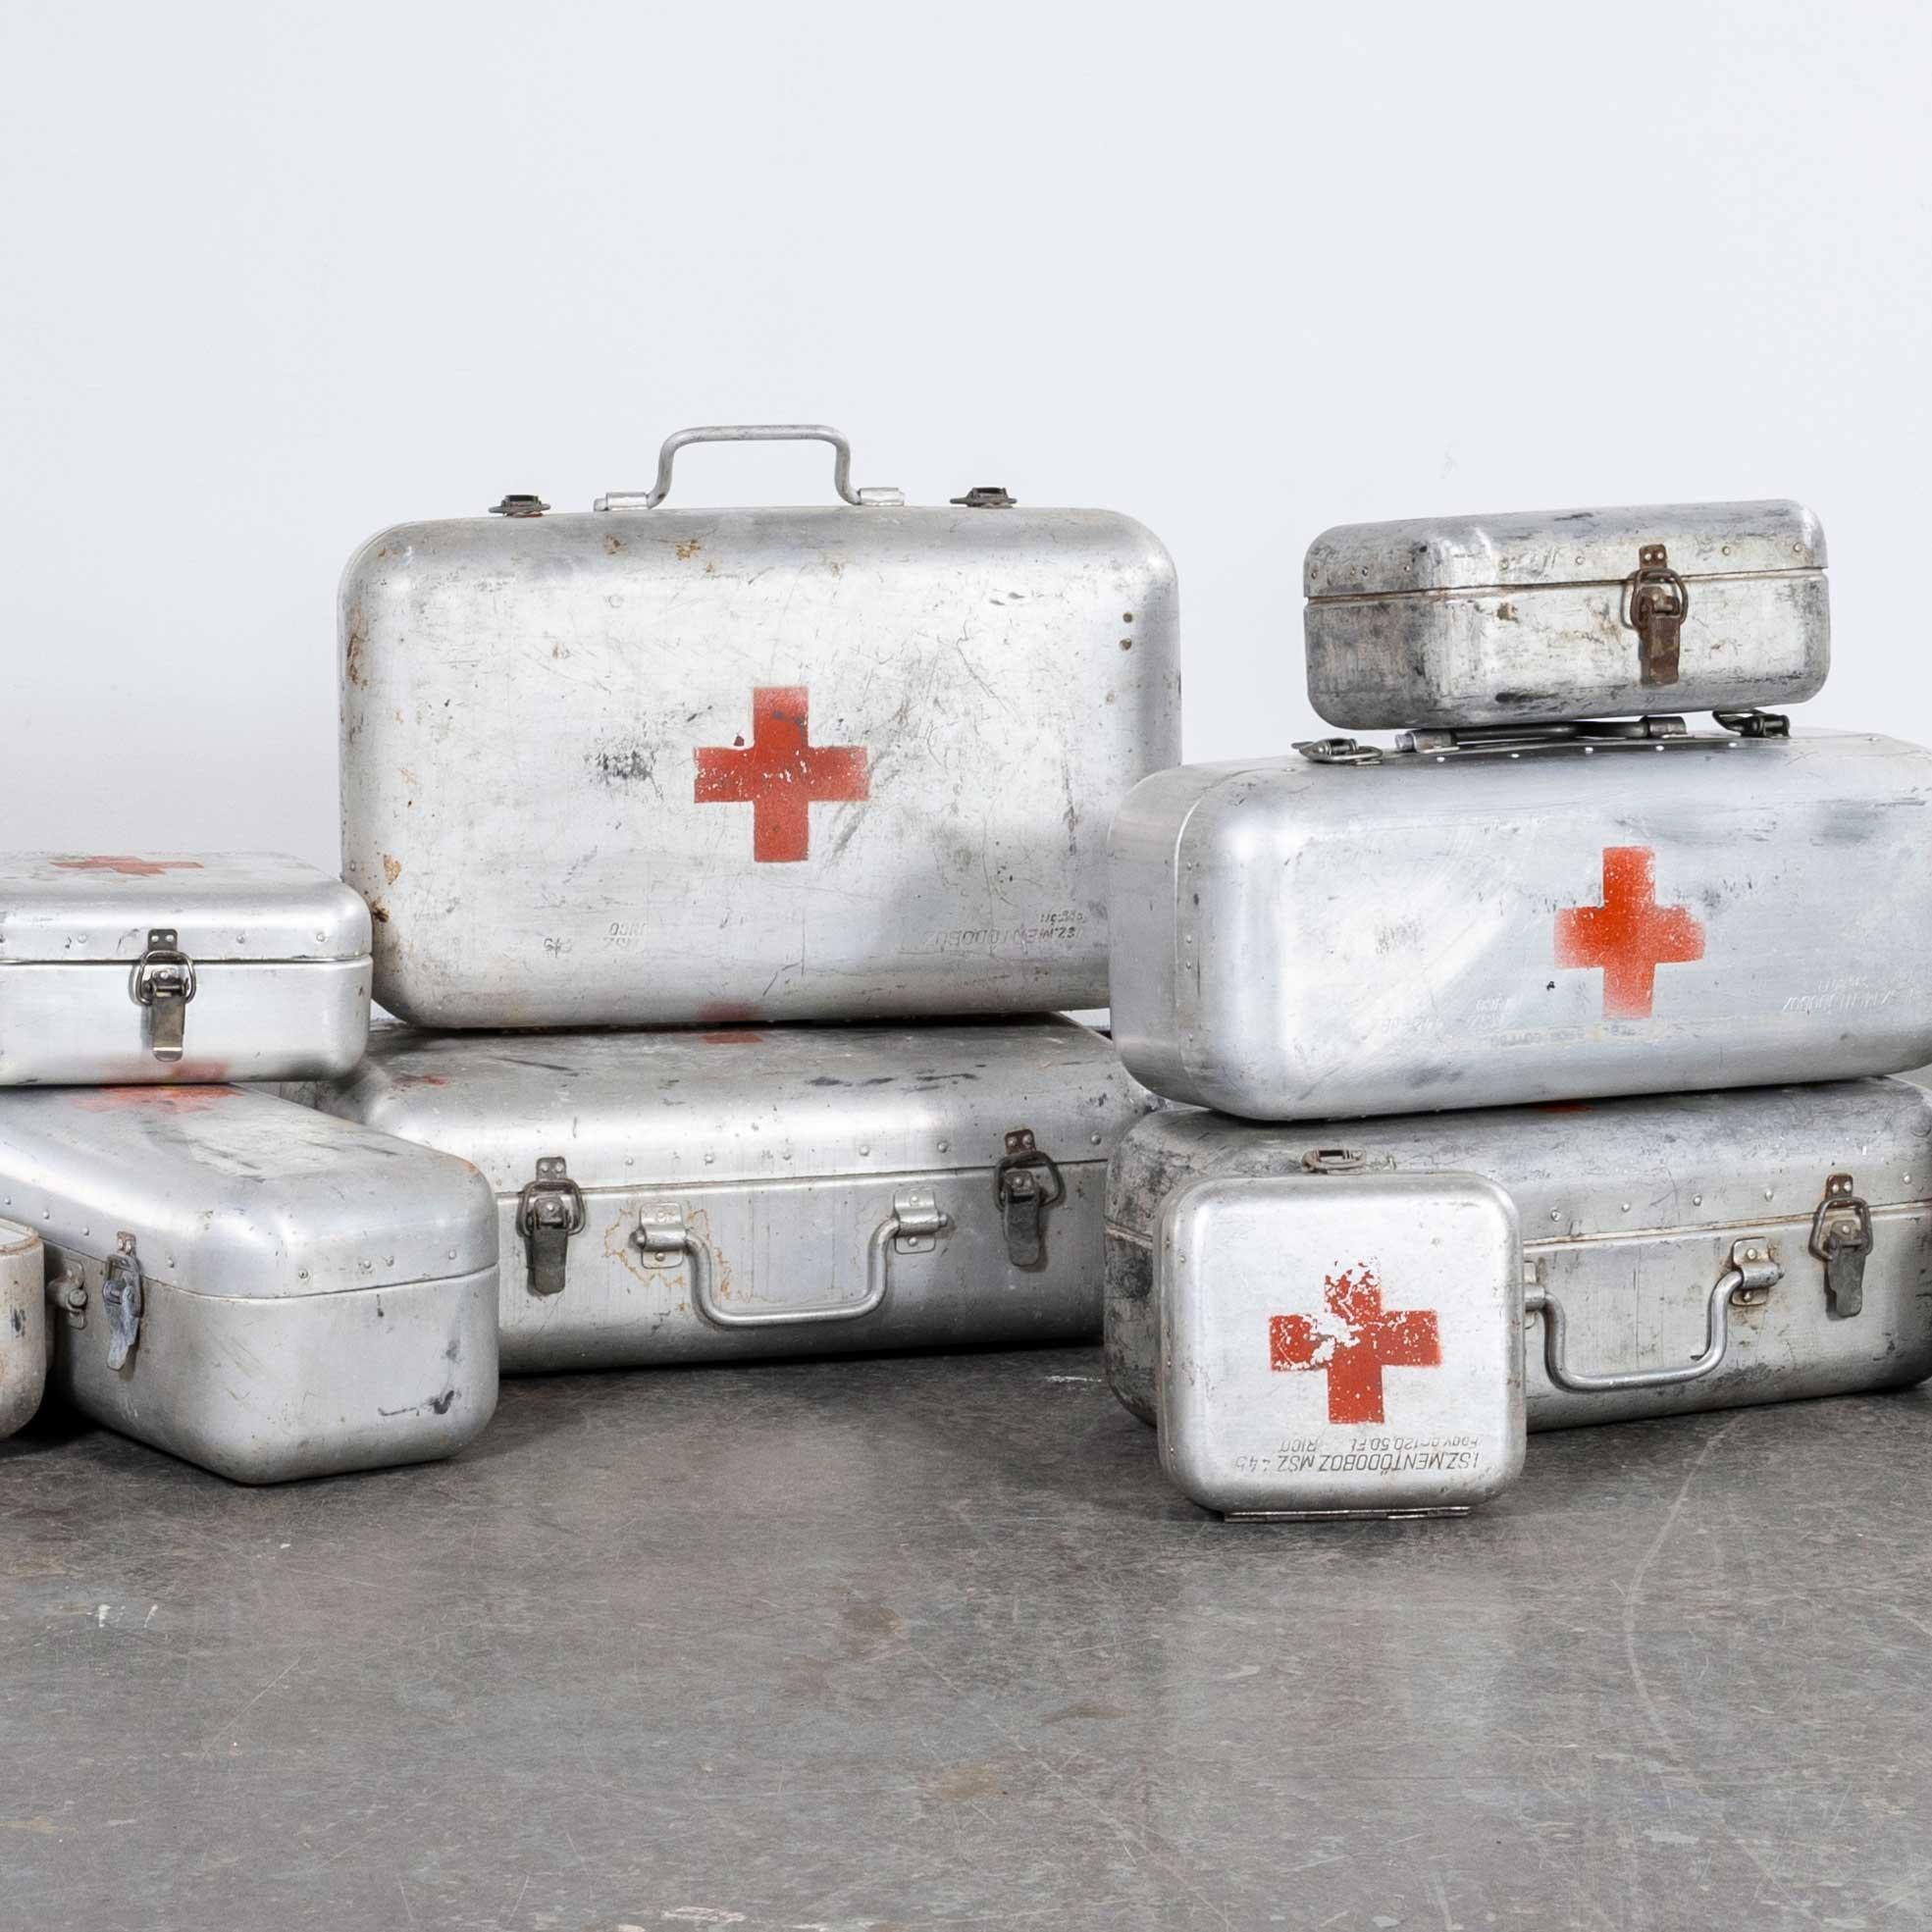 1960s Aluminium Red Cross Survival Rations Box For Sale 4